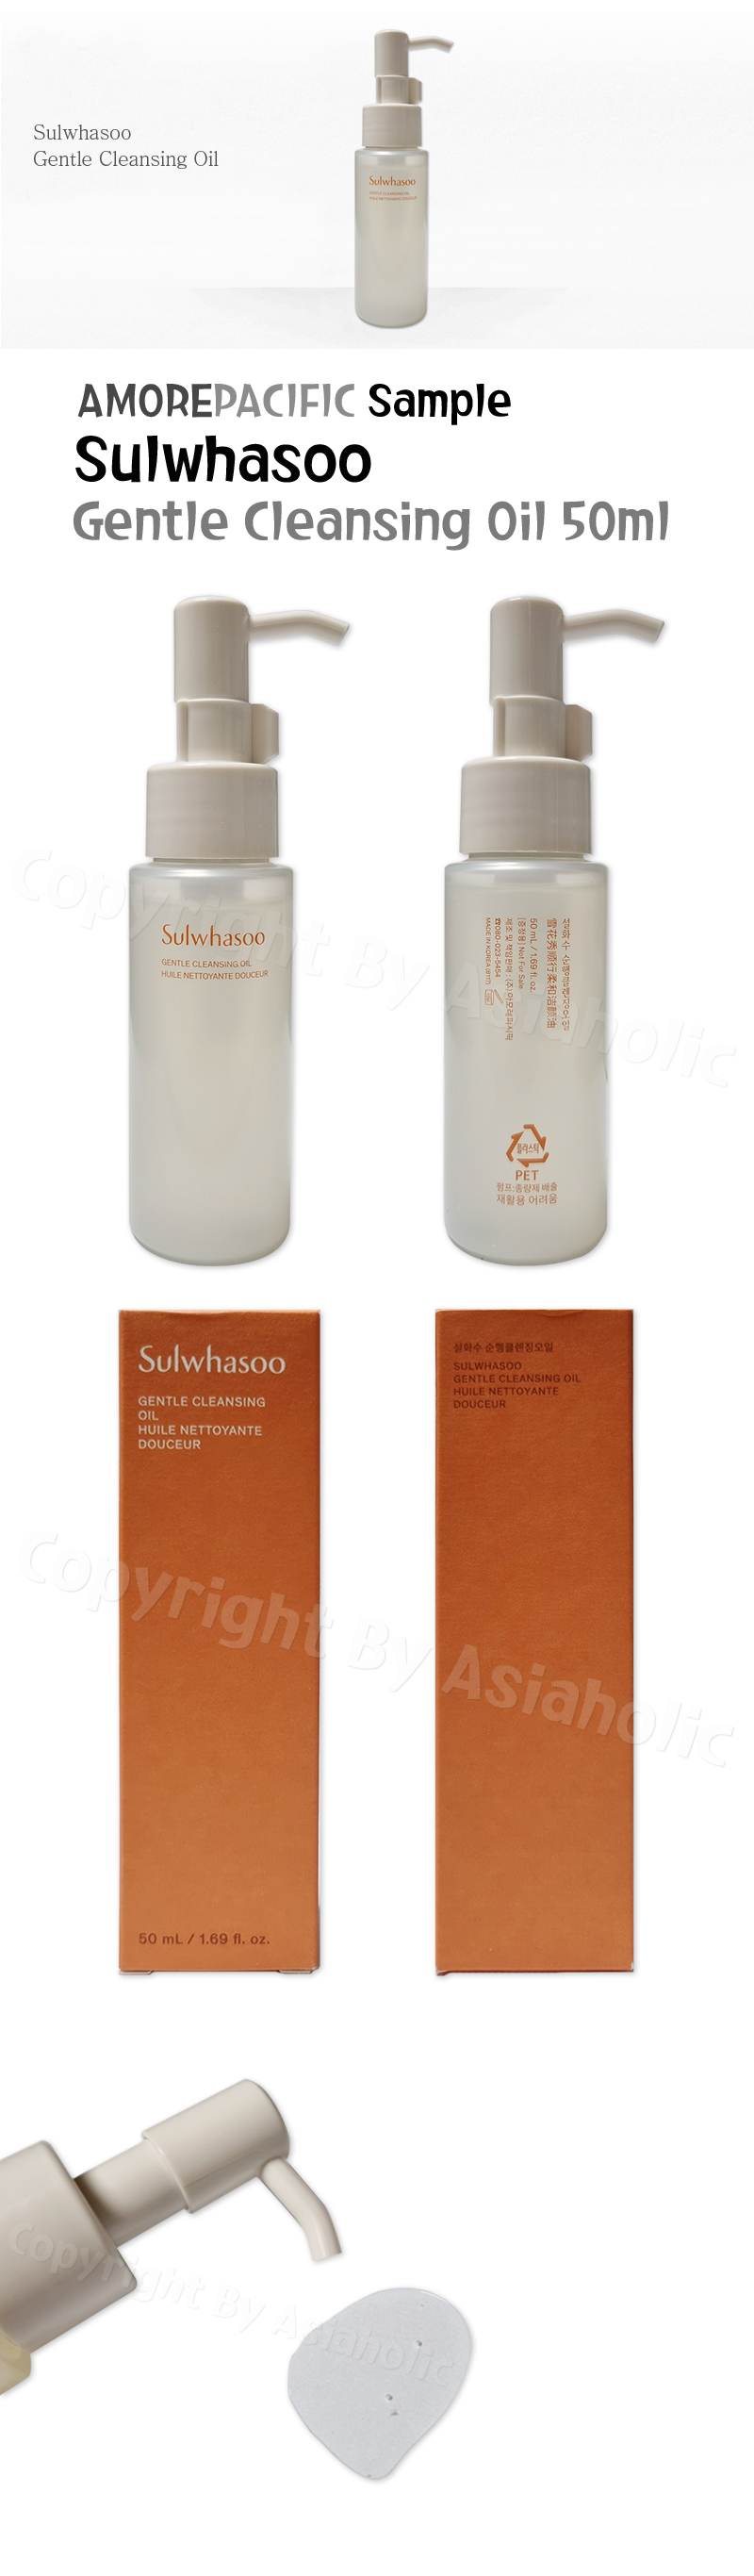 Sulwhasoo Gentle Cleansing Oil 50ml x 1pcs (50ml) Sample Newest Version